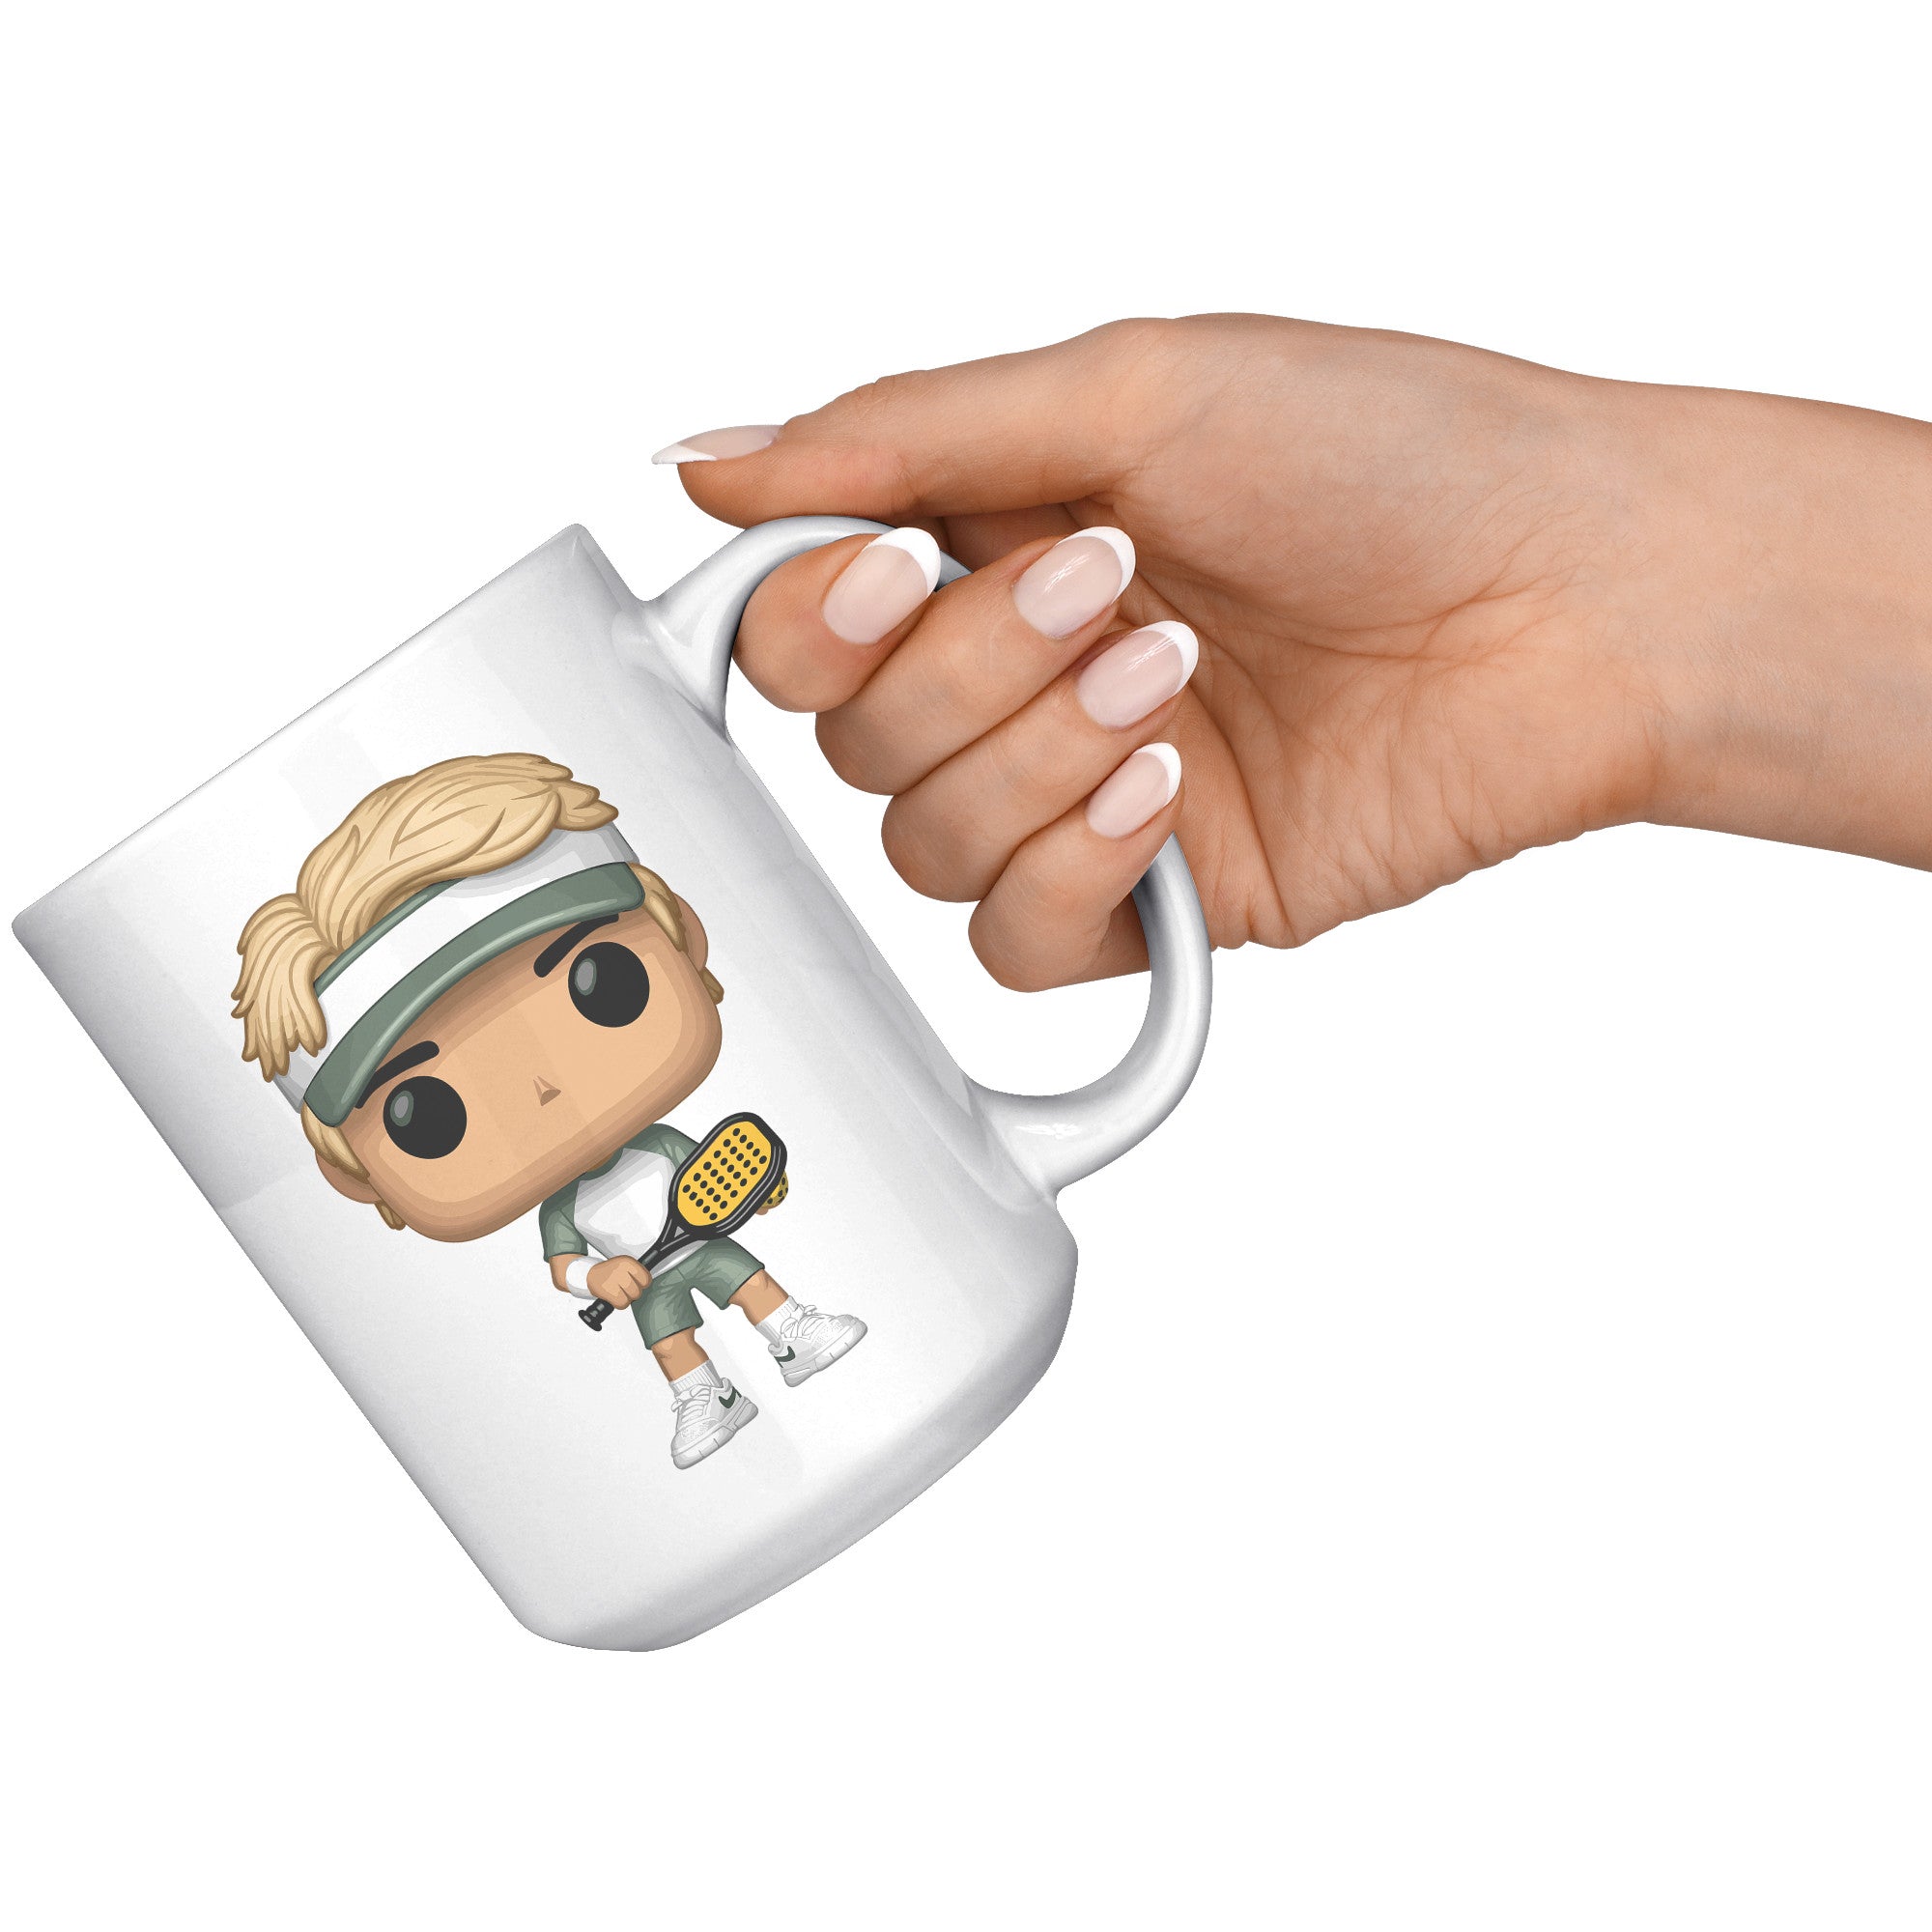 "Funko Pop Style Pickle Ball Player Boy Coffee Mug - Cute Athletic Cup - Perfect Gift for Pickle Ball Enthusiasts - Sporty Boy Apparel" - E1